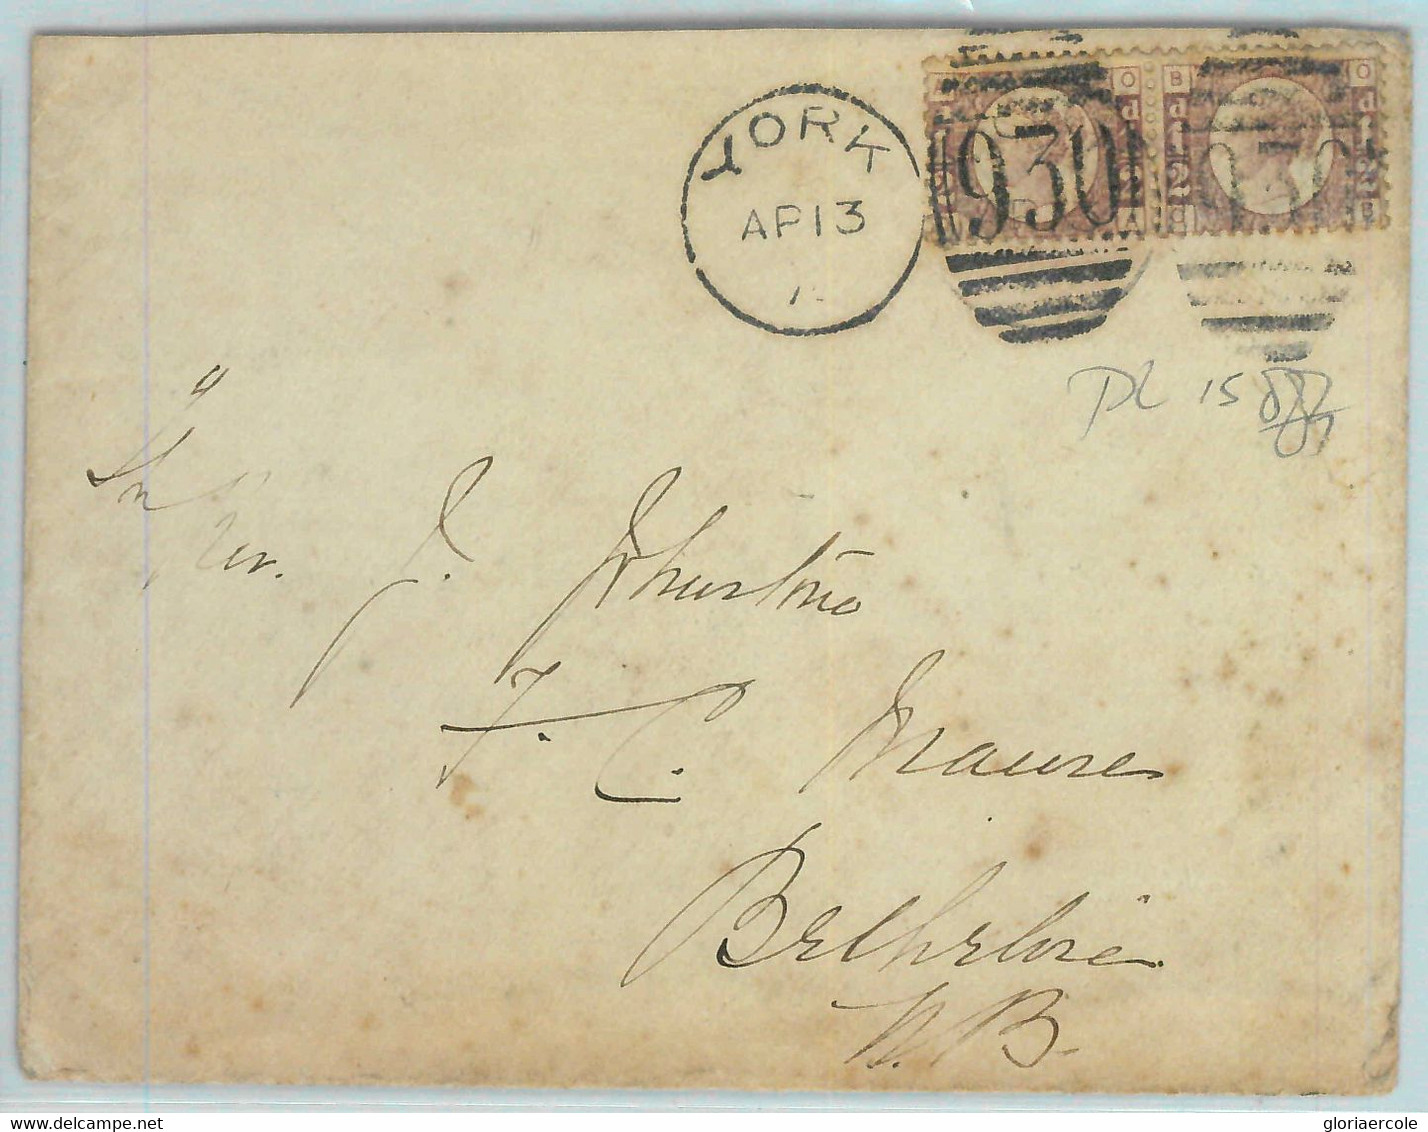 BK0689 - GB - POSTAL HISTORY - 1/2 Penny Plate 15 PAIR On COVER From YORK  1876 - Ohne Zuordnung